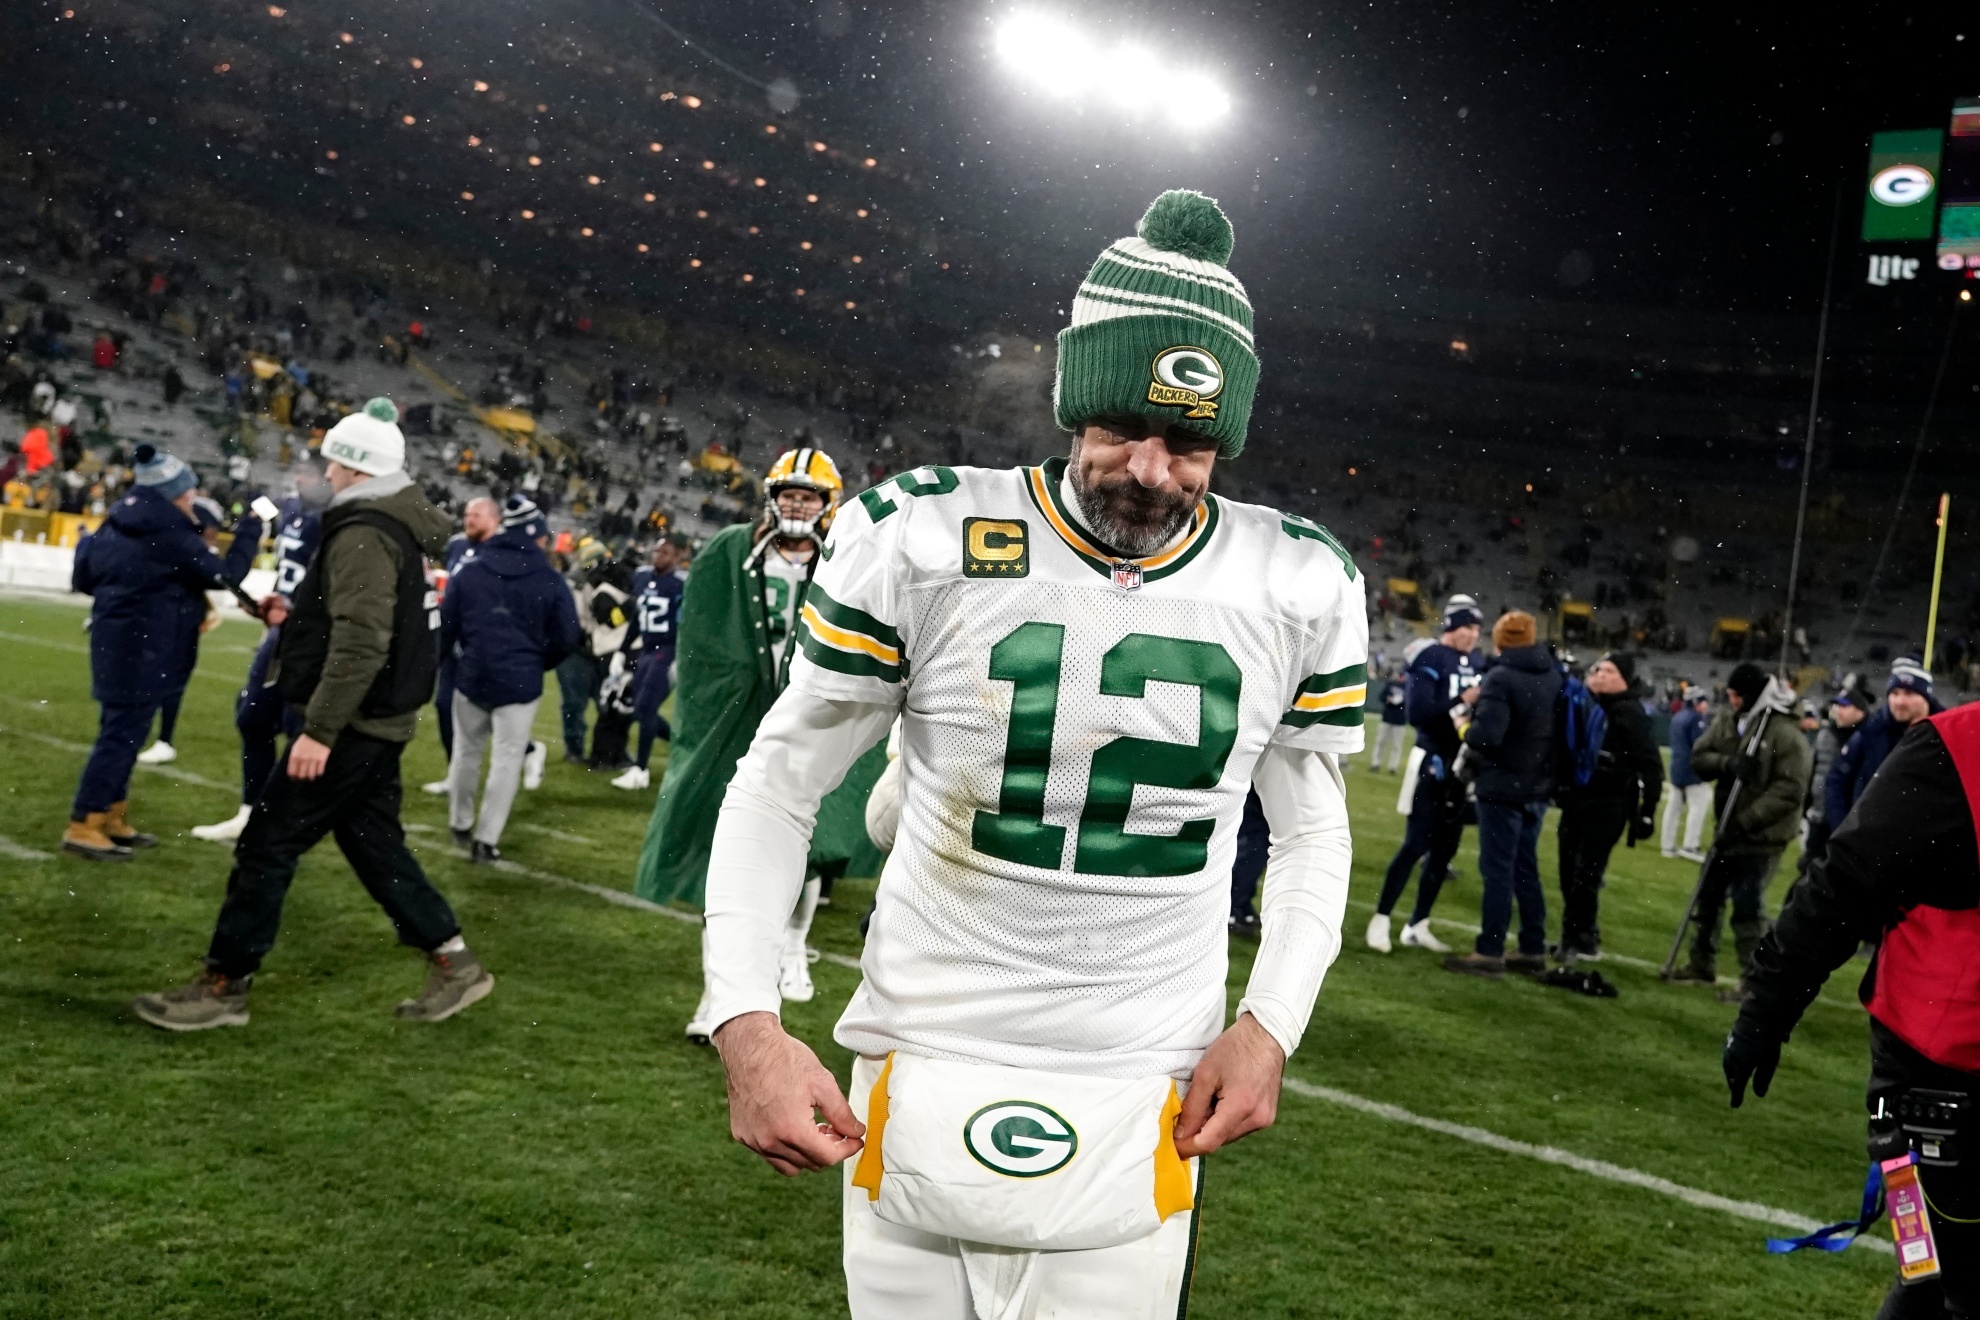 Aaron Rodgers - Green Bay Packers